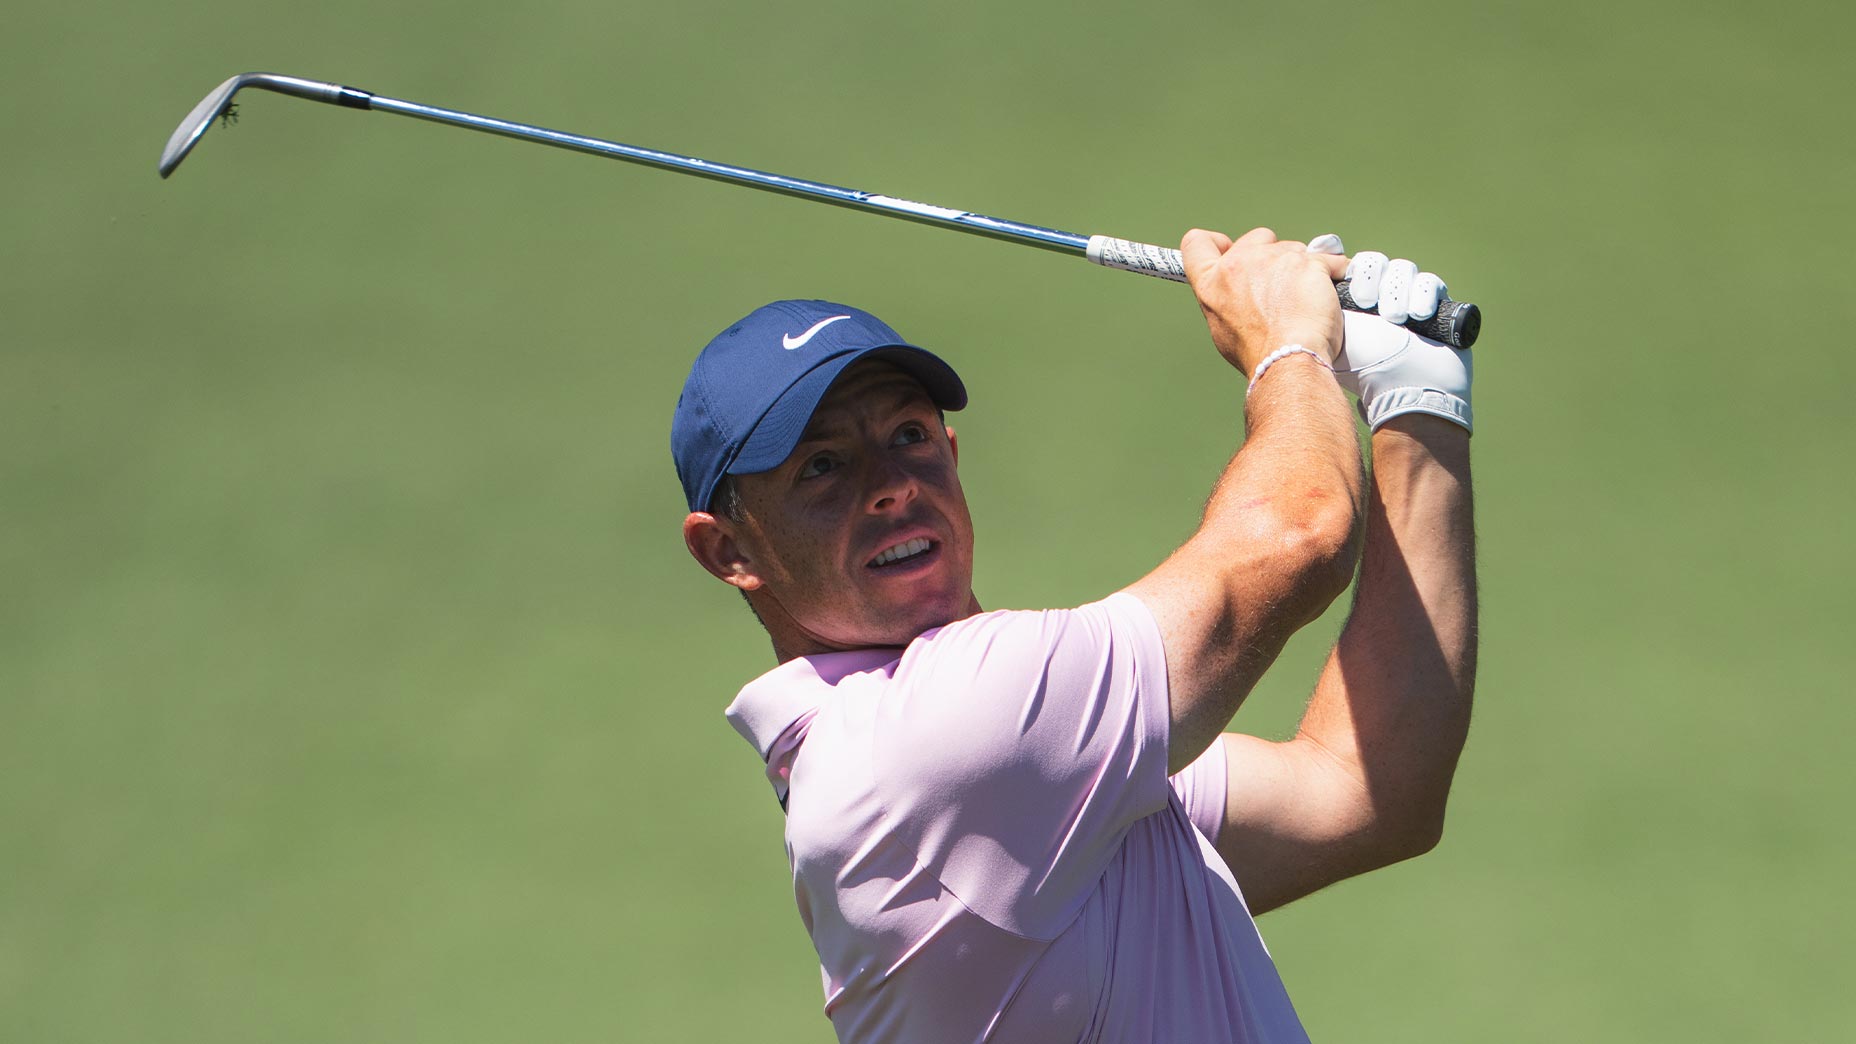 rory mcilroy swings wedge shot at the Masters in a lilac shirt